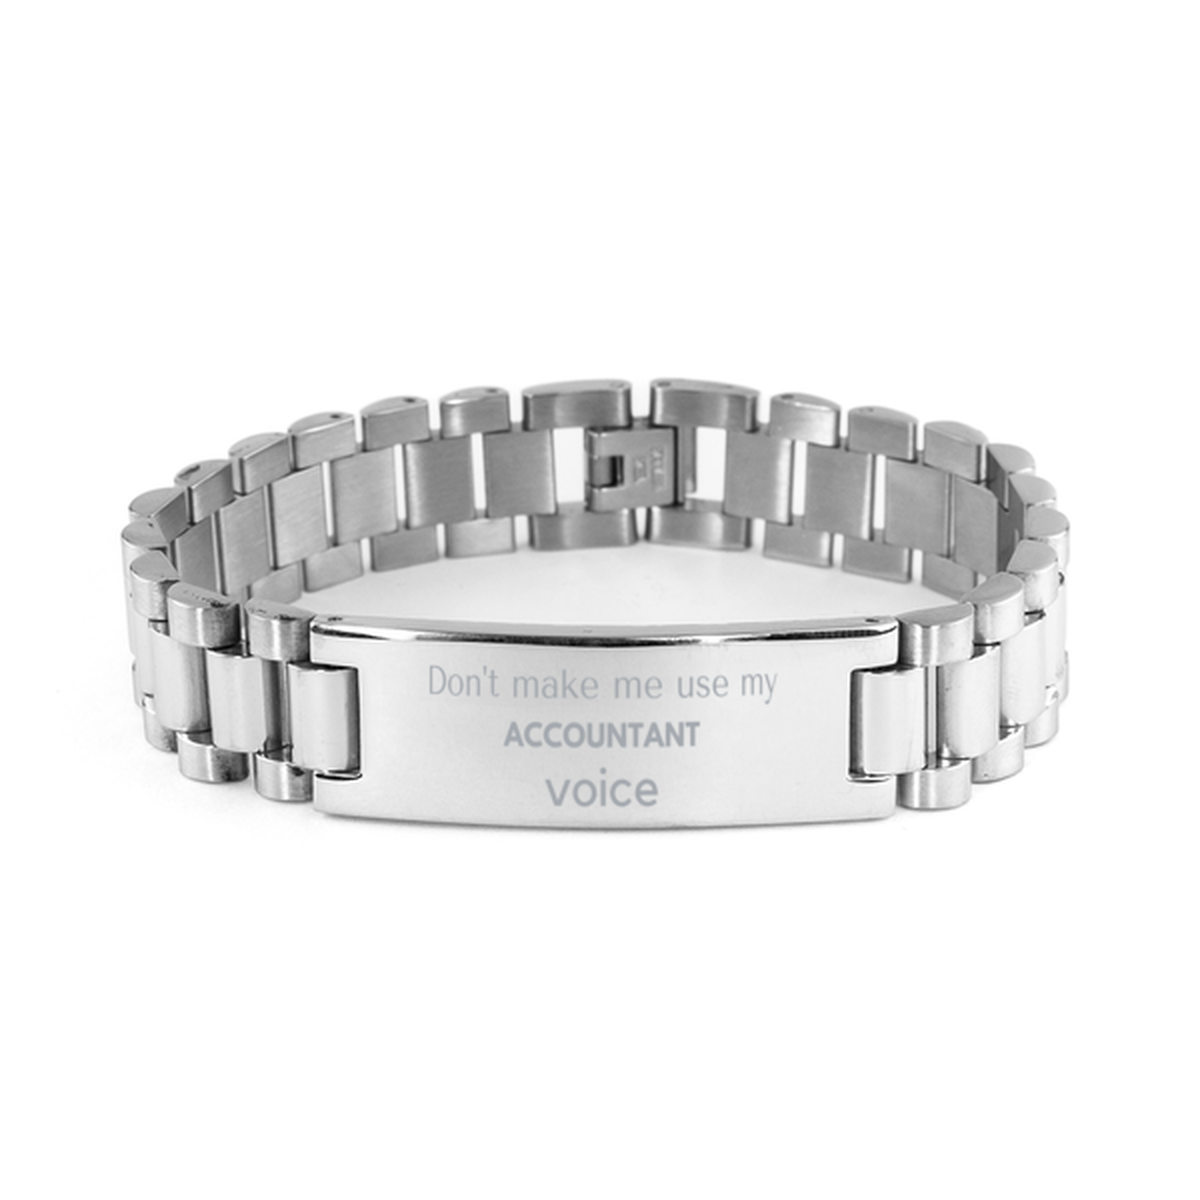 Don't make me use my Accountant voice, Sarcasm Accountant Gifts, Christmas Accountant Ladder Stainless Steel Bracelet Birthday Unique Gifts For Accountant Coworkers, Men, Women, Colleague, Friends